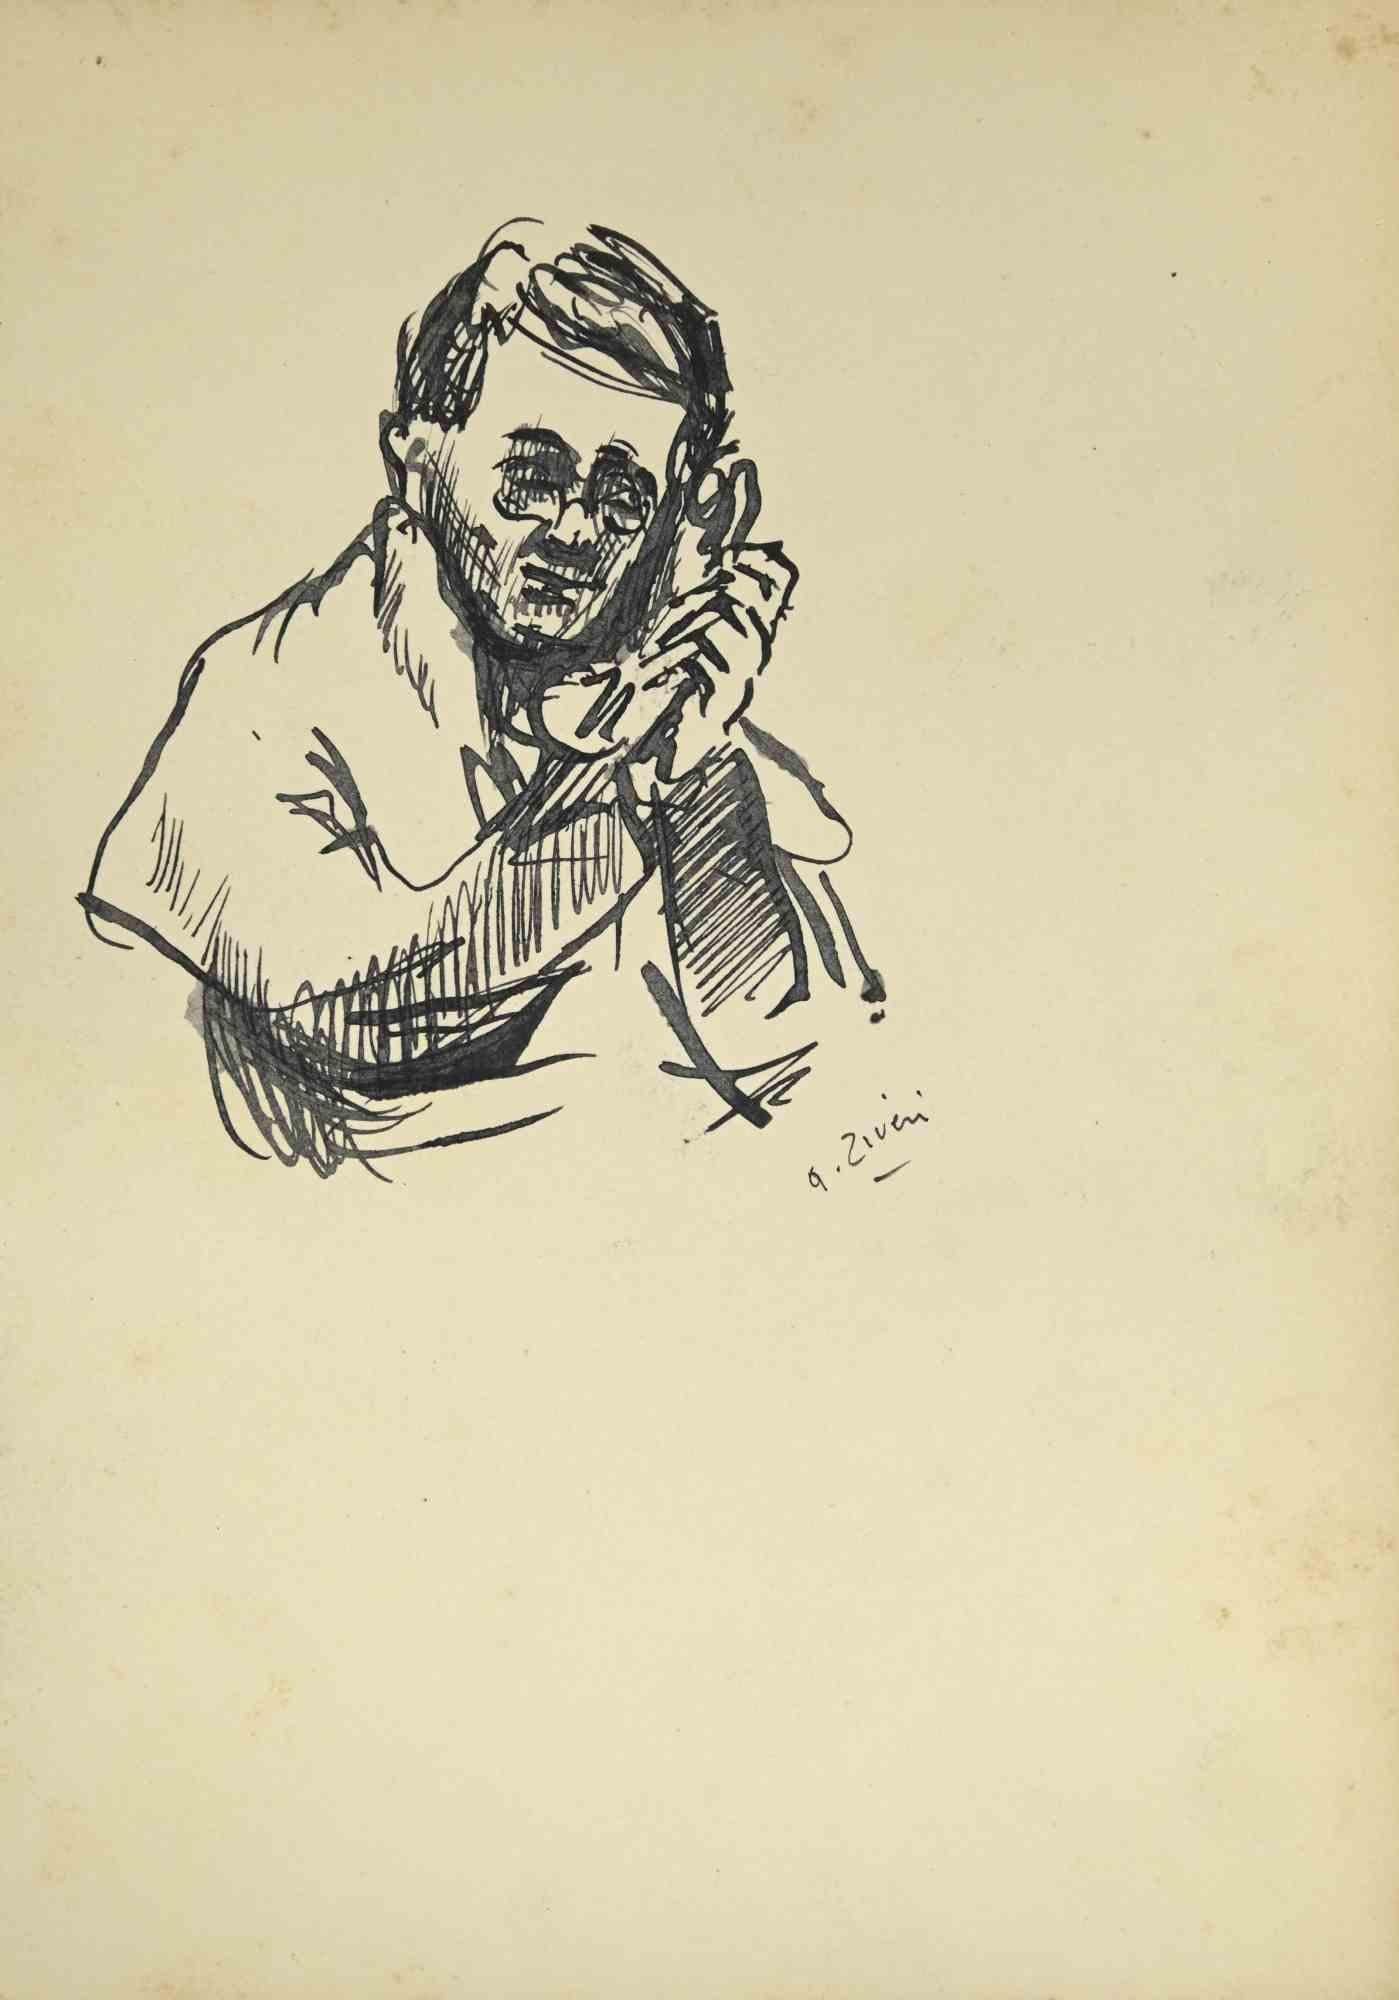 The Man with Phone is a drawing realized by Alberto Ziveri in the 1930s.

Watercolor on paper.

Hand-signed.

In good condition with slight foxing.

The artwork is represented through deft strokes masterly.

aAlberto Ziveri (Rome,1908 – 1990), the